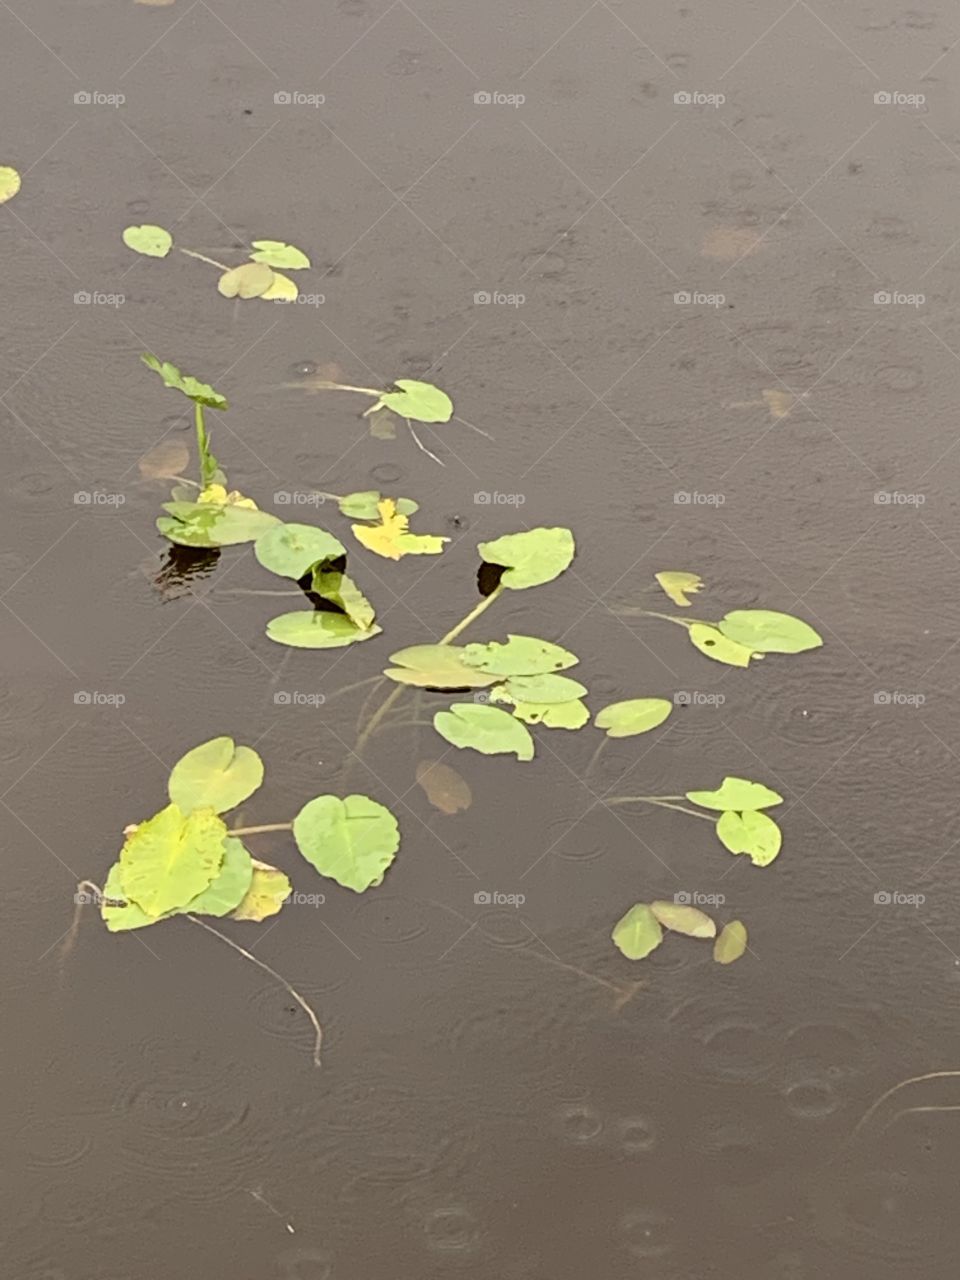 Lilly Pads in the rain 